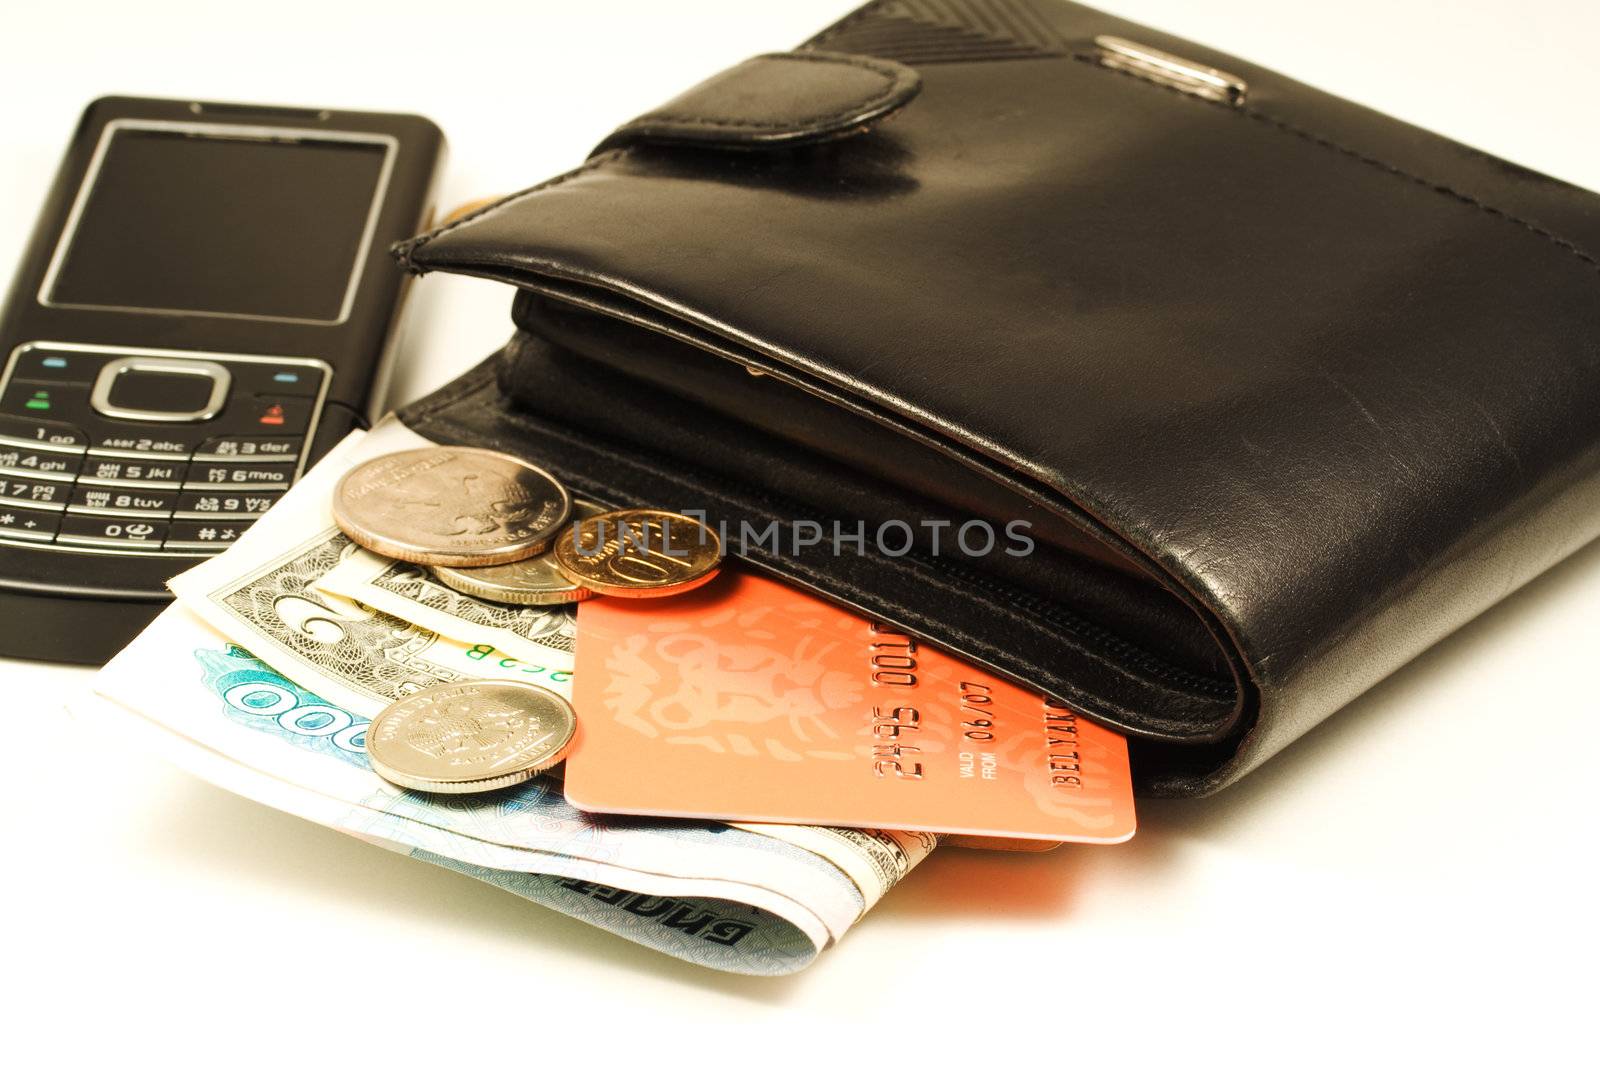 Mobile phone, wallet with cash and credit card by serpl